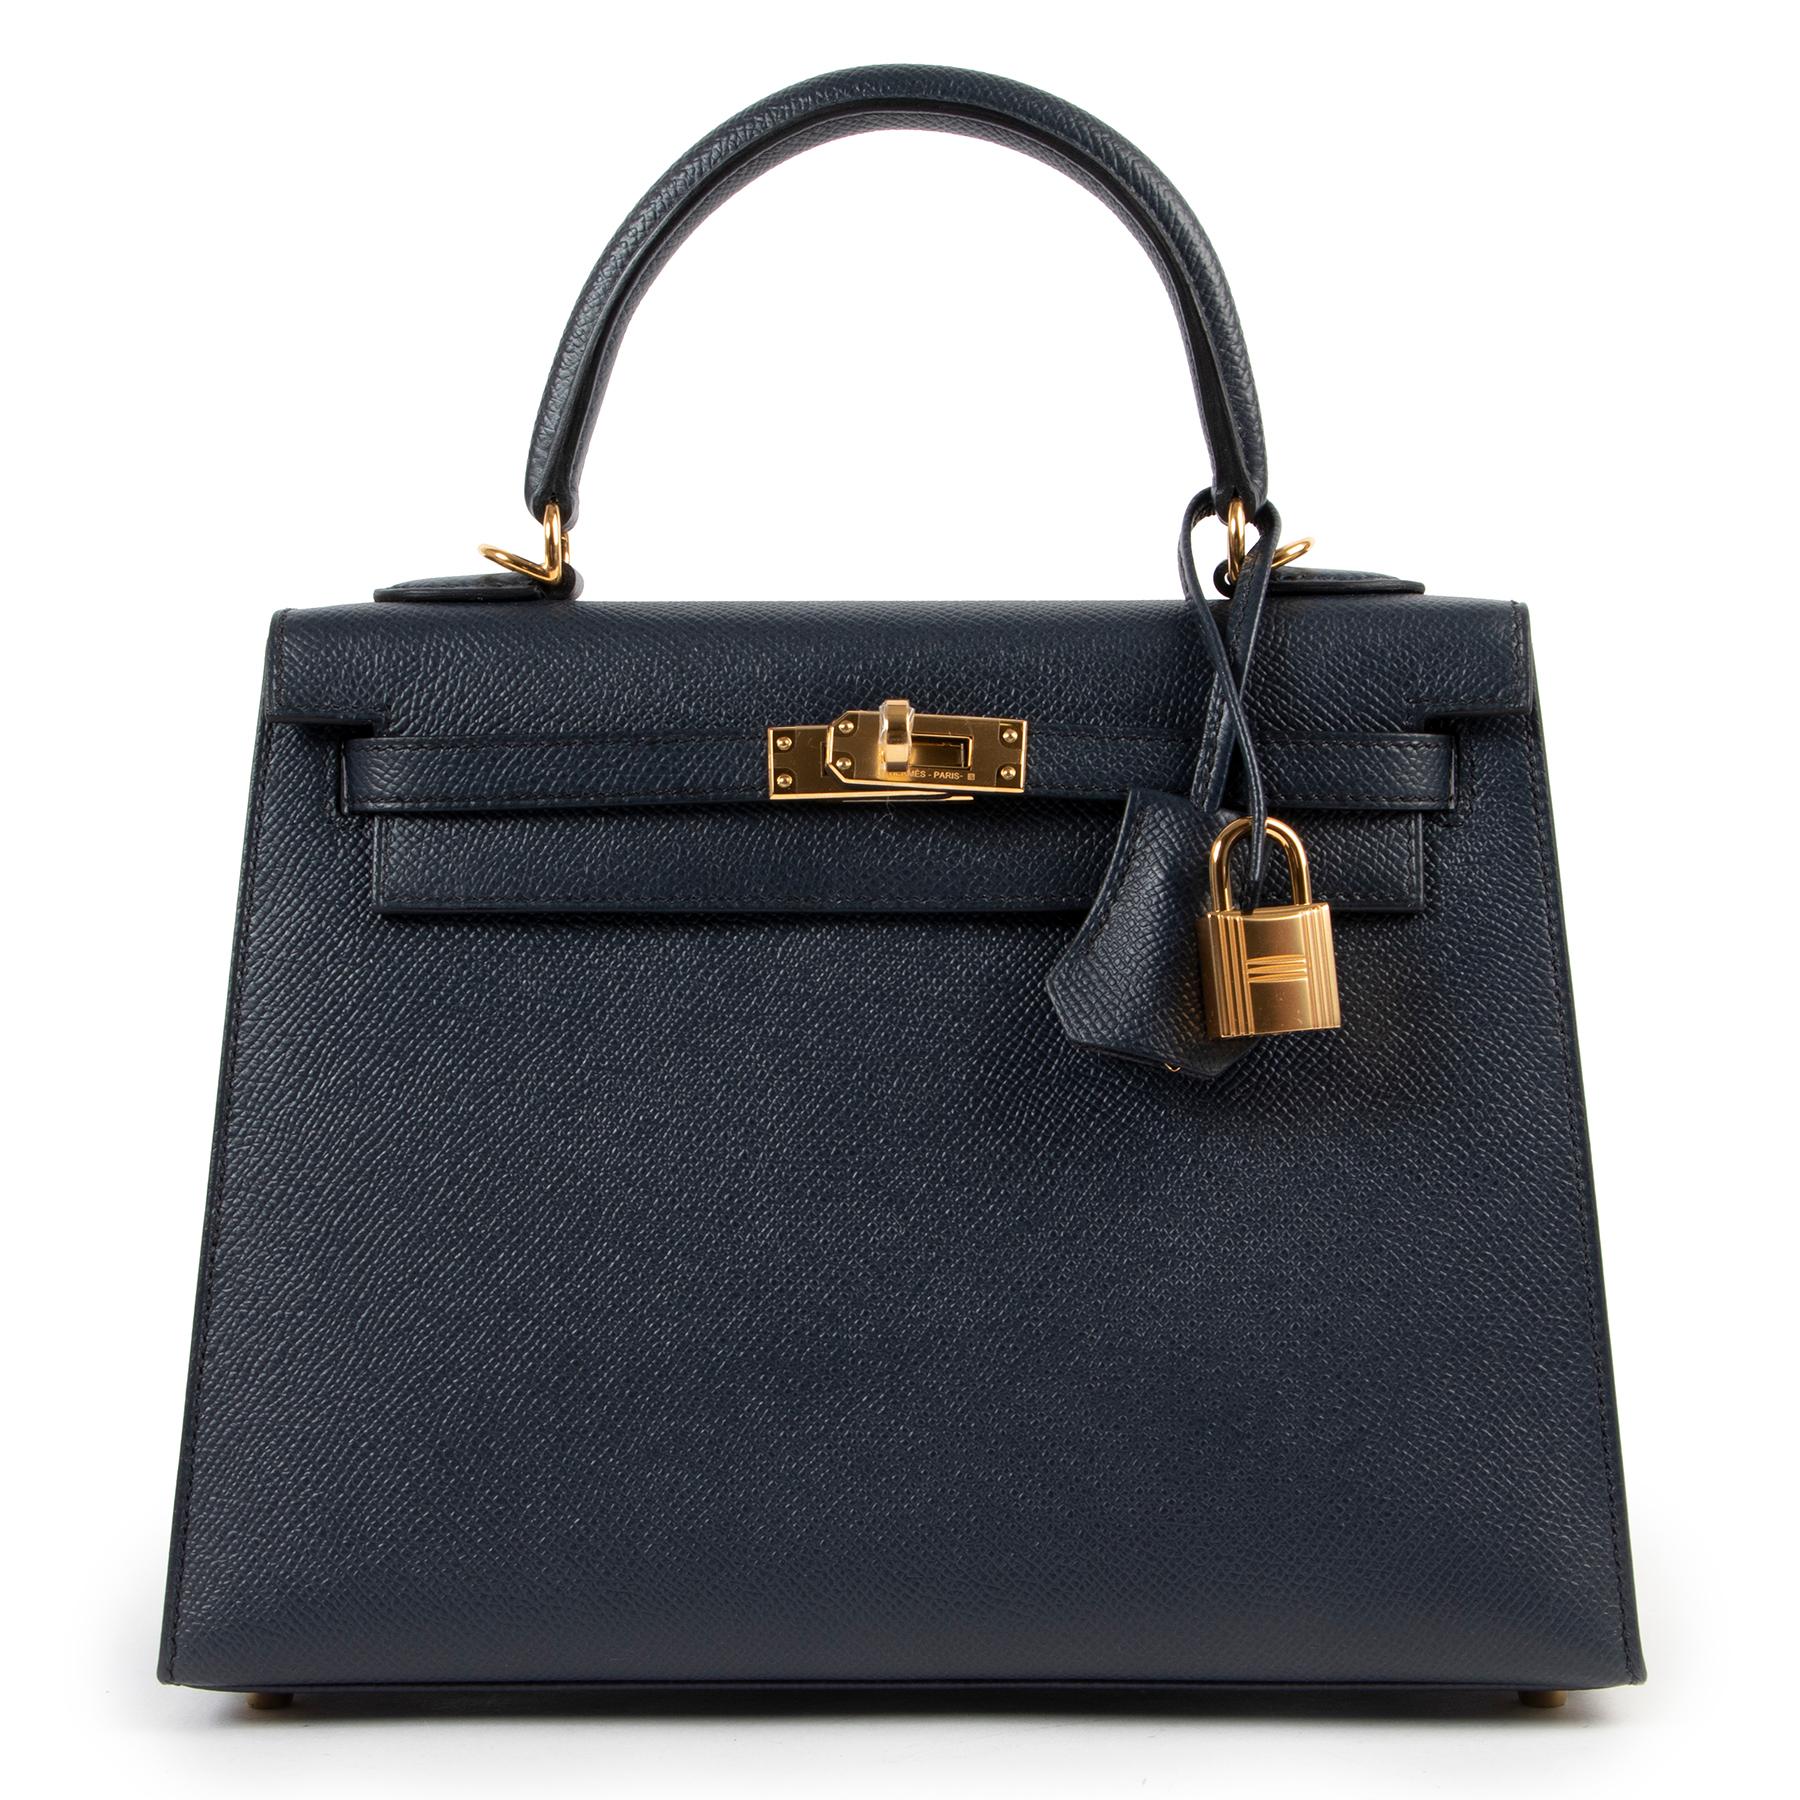 Hermes Epsom Indigo Kelly 25 GHW
What a stunner this iconic Kelly bag in the very hard to find 25 size. 
This stunning Hermès Kelly 25cm is made from epsom. This compressed type of leather holds true to its shape in all instances and is completely